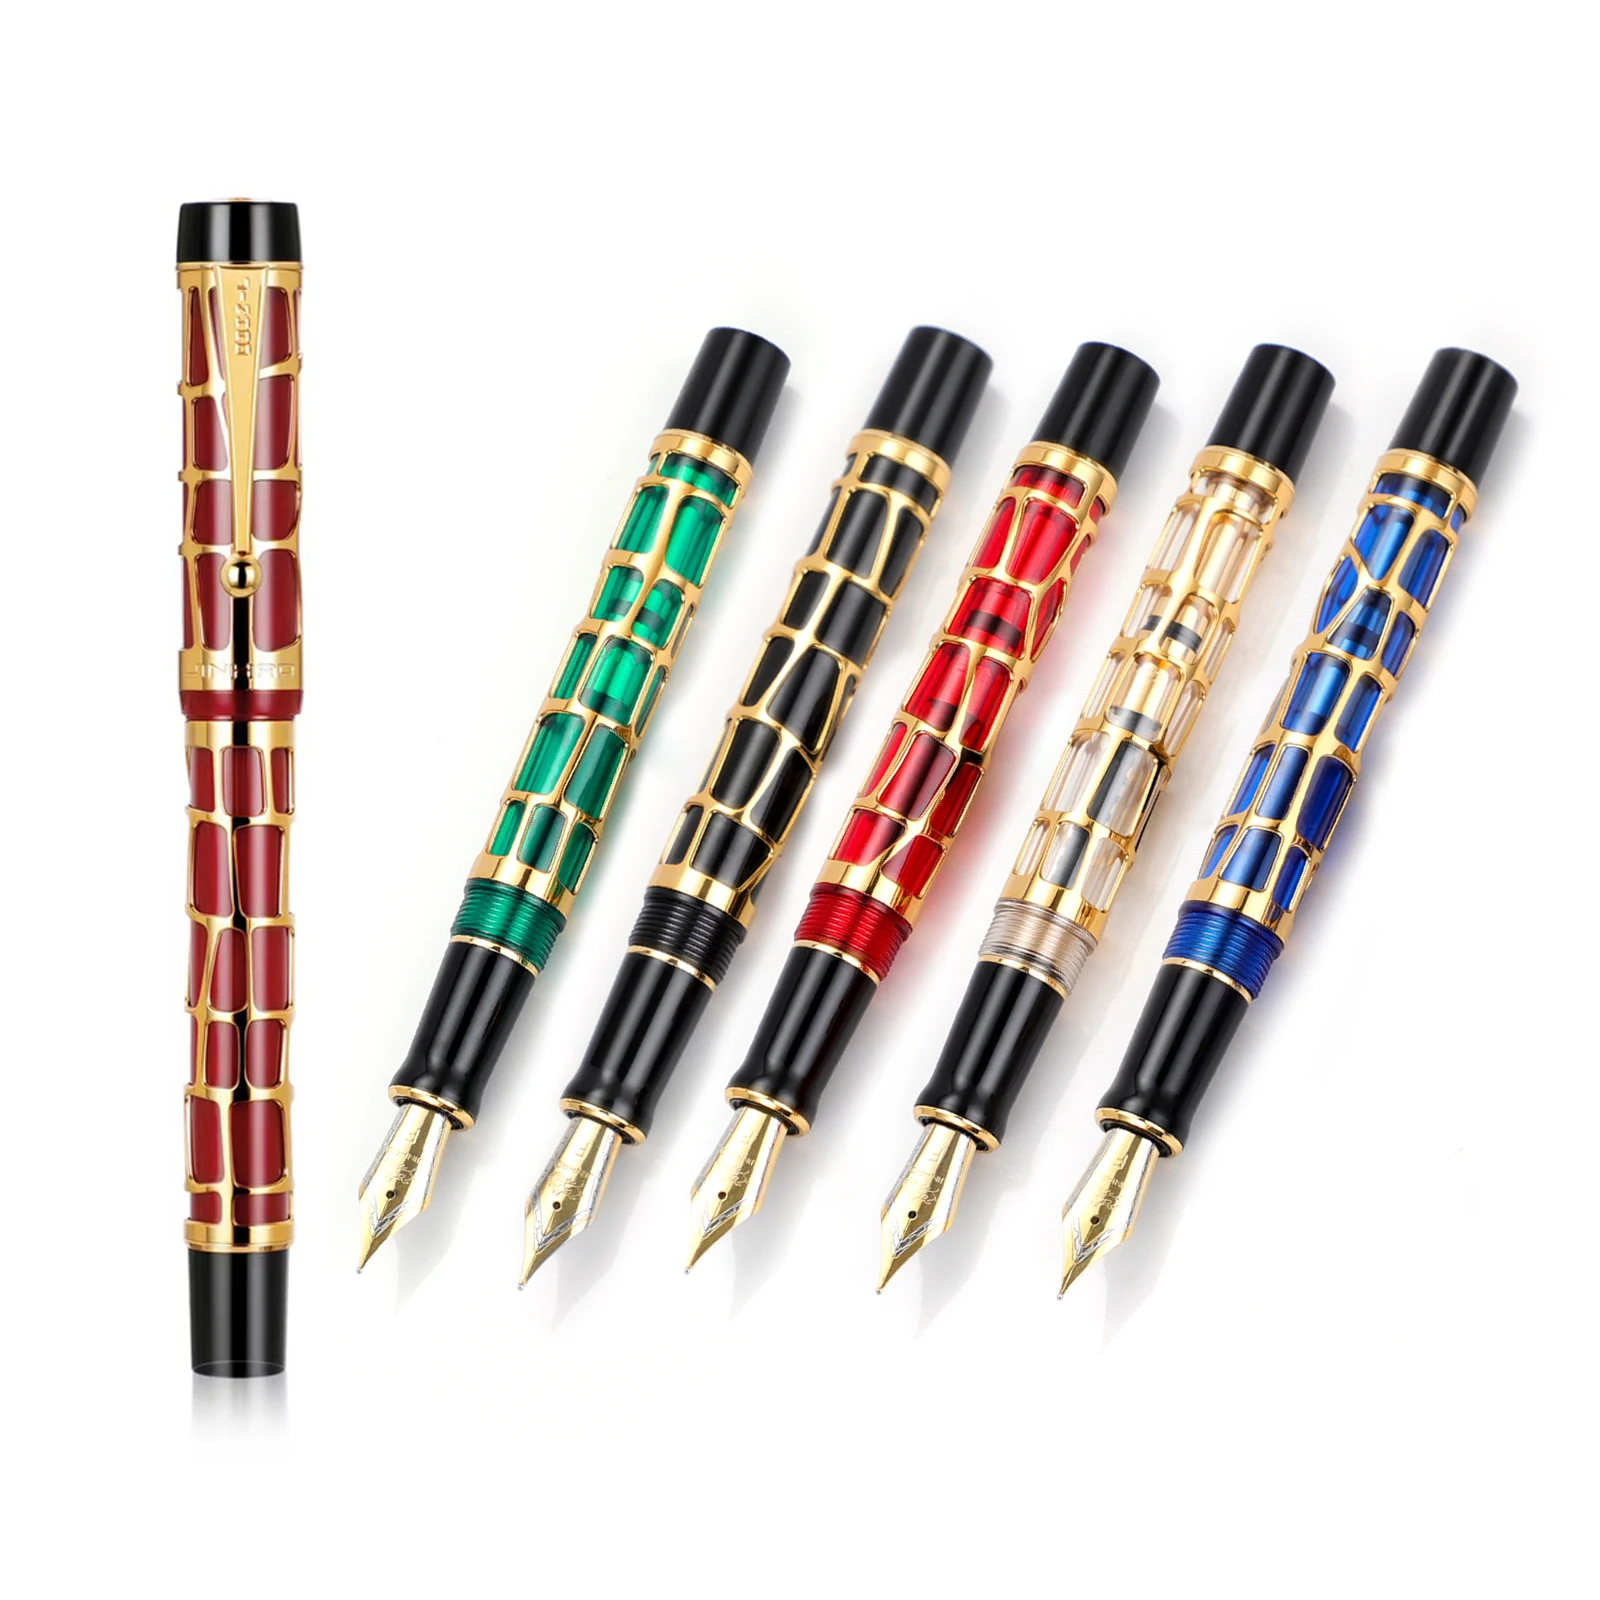 Jinhao Century 100 Fountain Pen Electroplating Gold Hollow Writing Ink Pens EF 0.4mm Nib for Business Office supplies gift pens 40sheets material paper halloween old writing pads magic notebooks supplies scrapbook background century traveler 160 95mm